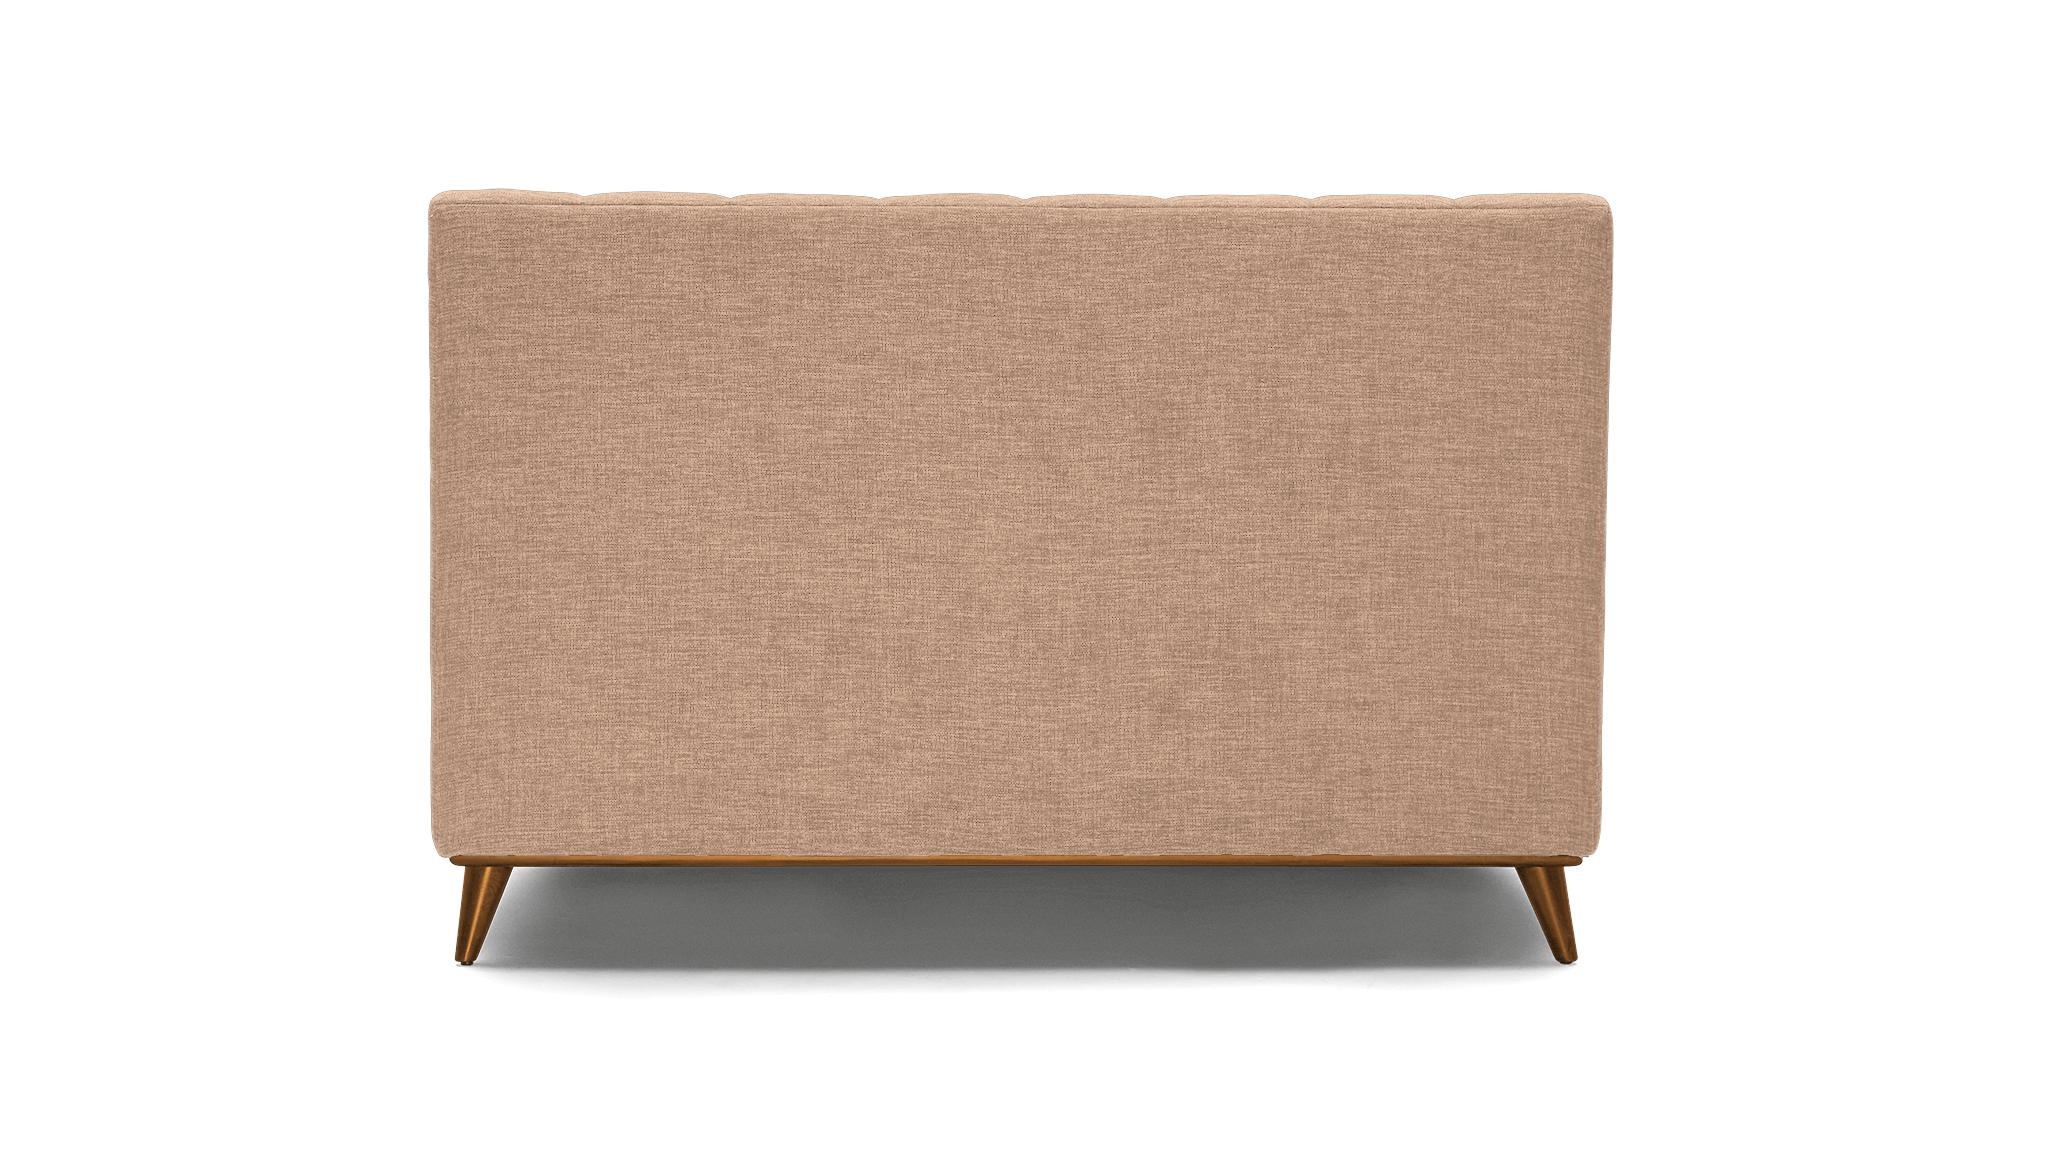 Pink Hughes Mid Century Modern Bed - Royale Blush - Mocha - Queen - Image 4